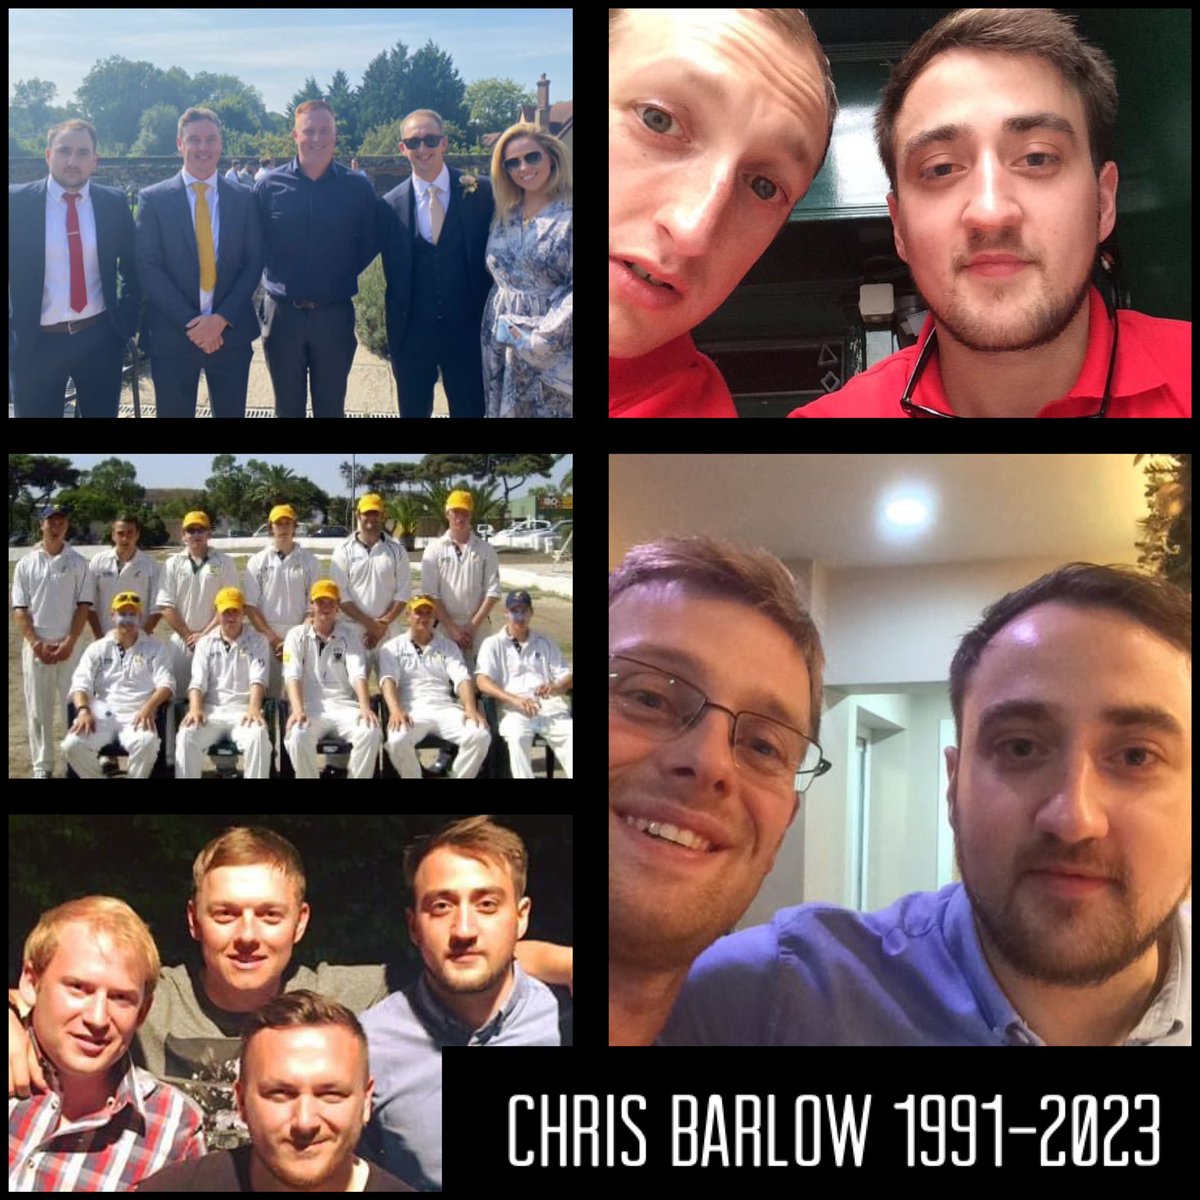 RIP Chris Barlow 1991-2023

We are devastated that such an integral part of Marple Cricket Club has gone so soon.

Fantastic on the field, brilliant off the field - Chris was someone who made Marple CC better in every way.